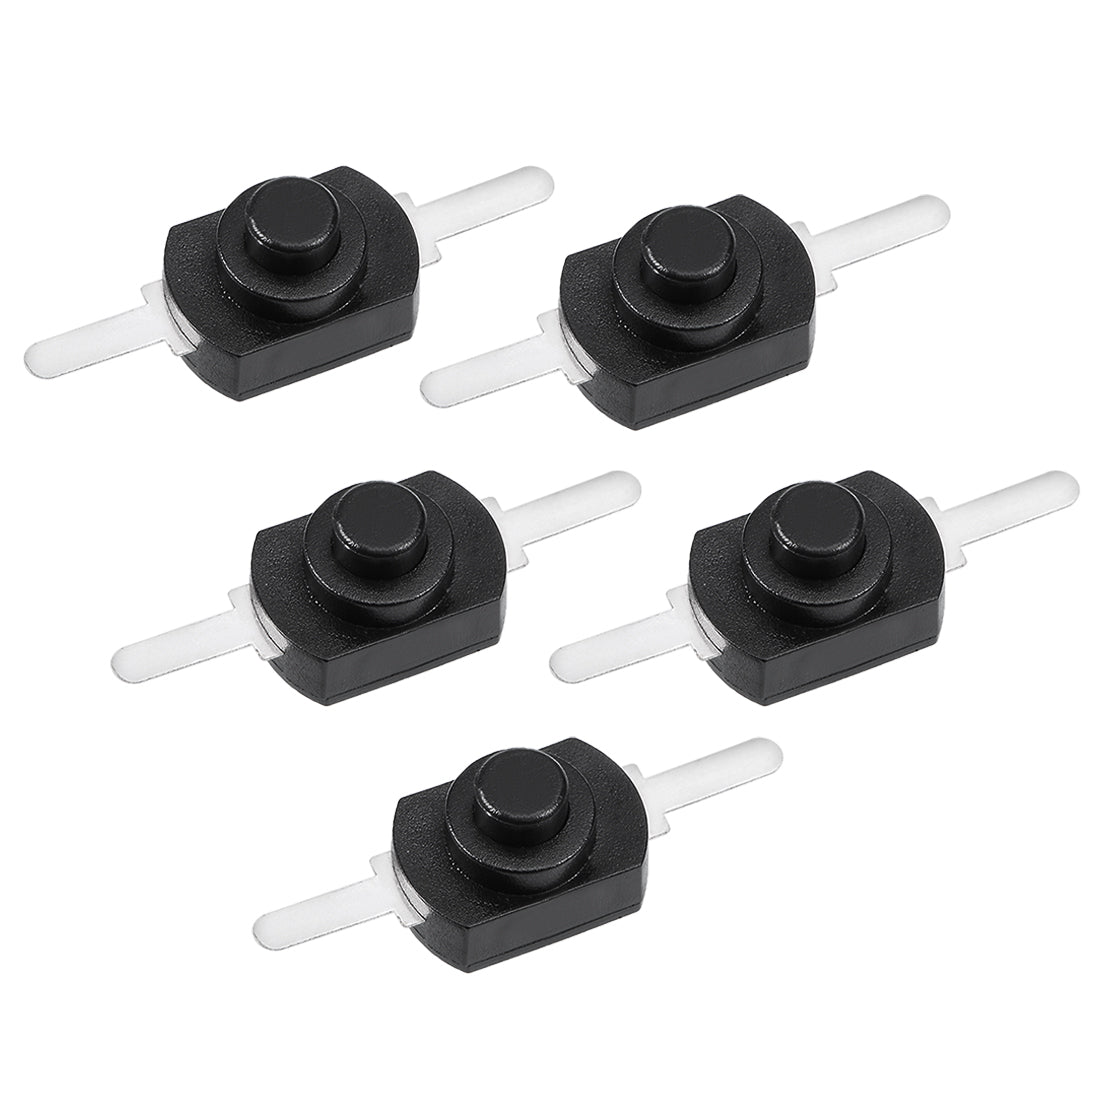 uxcell Uxcell 5 Pcs 2 Terminal PCB Latching Tactile Tact Push Button Switch for Torch